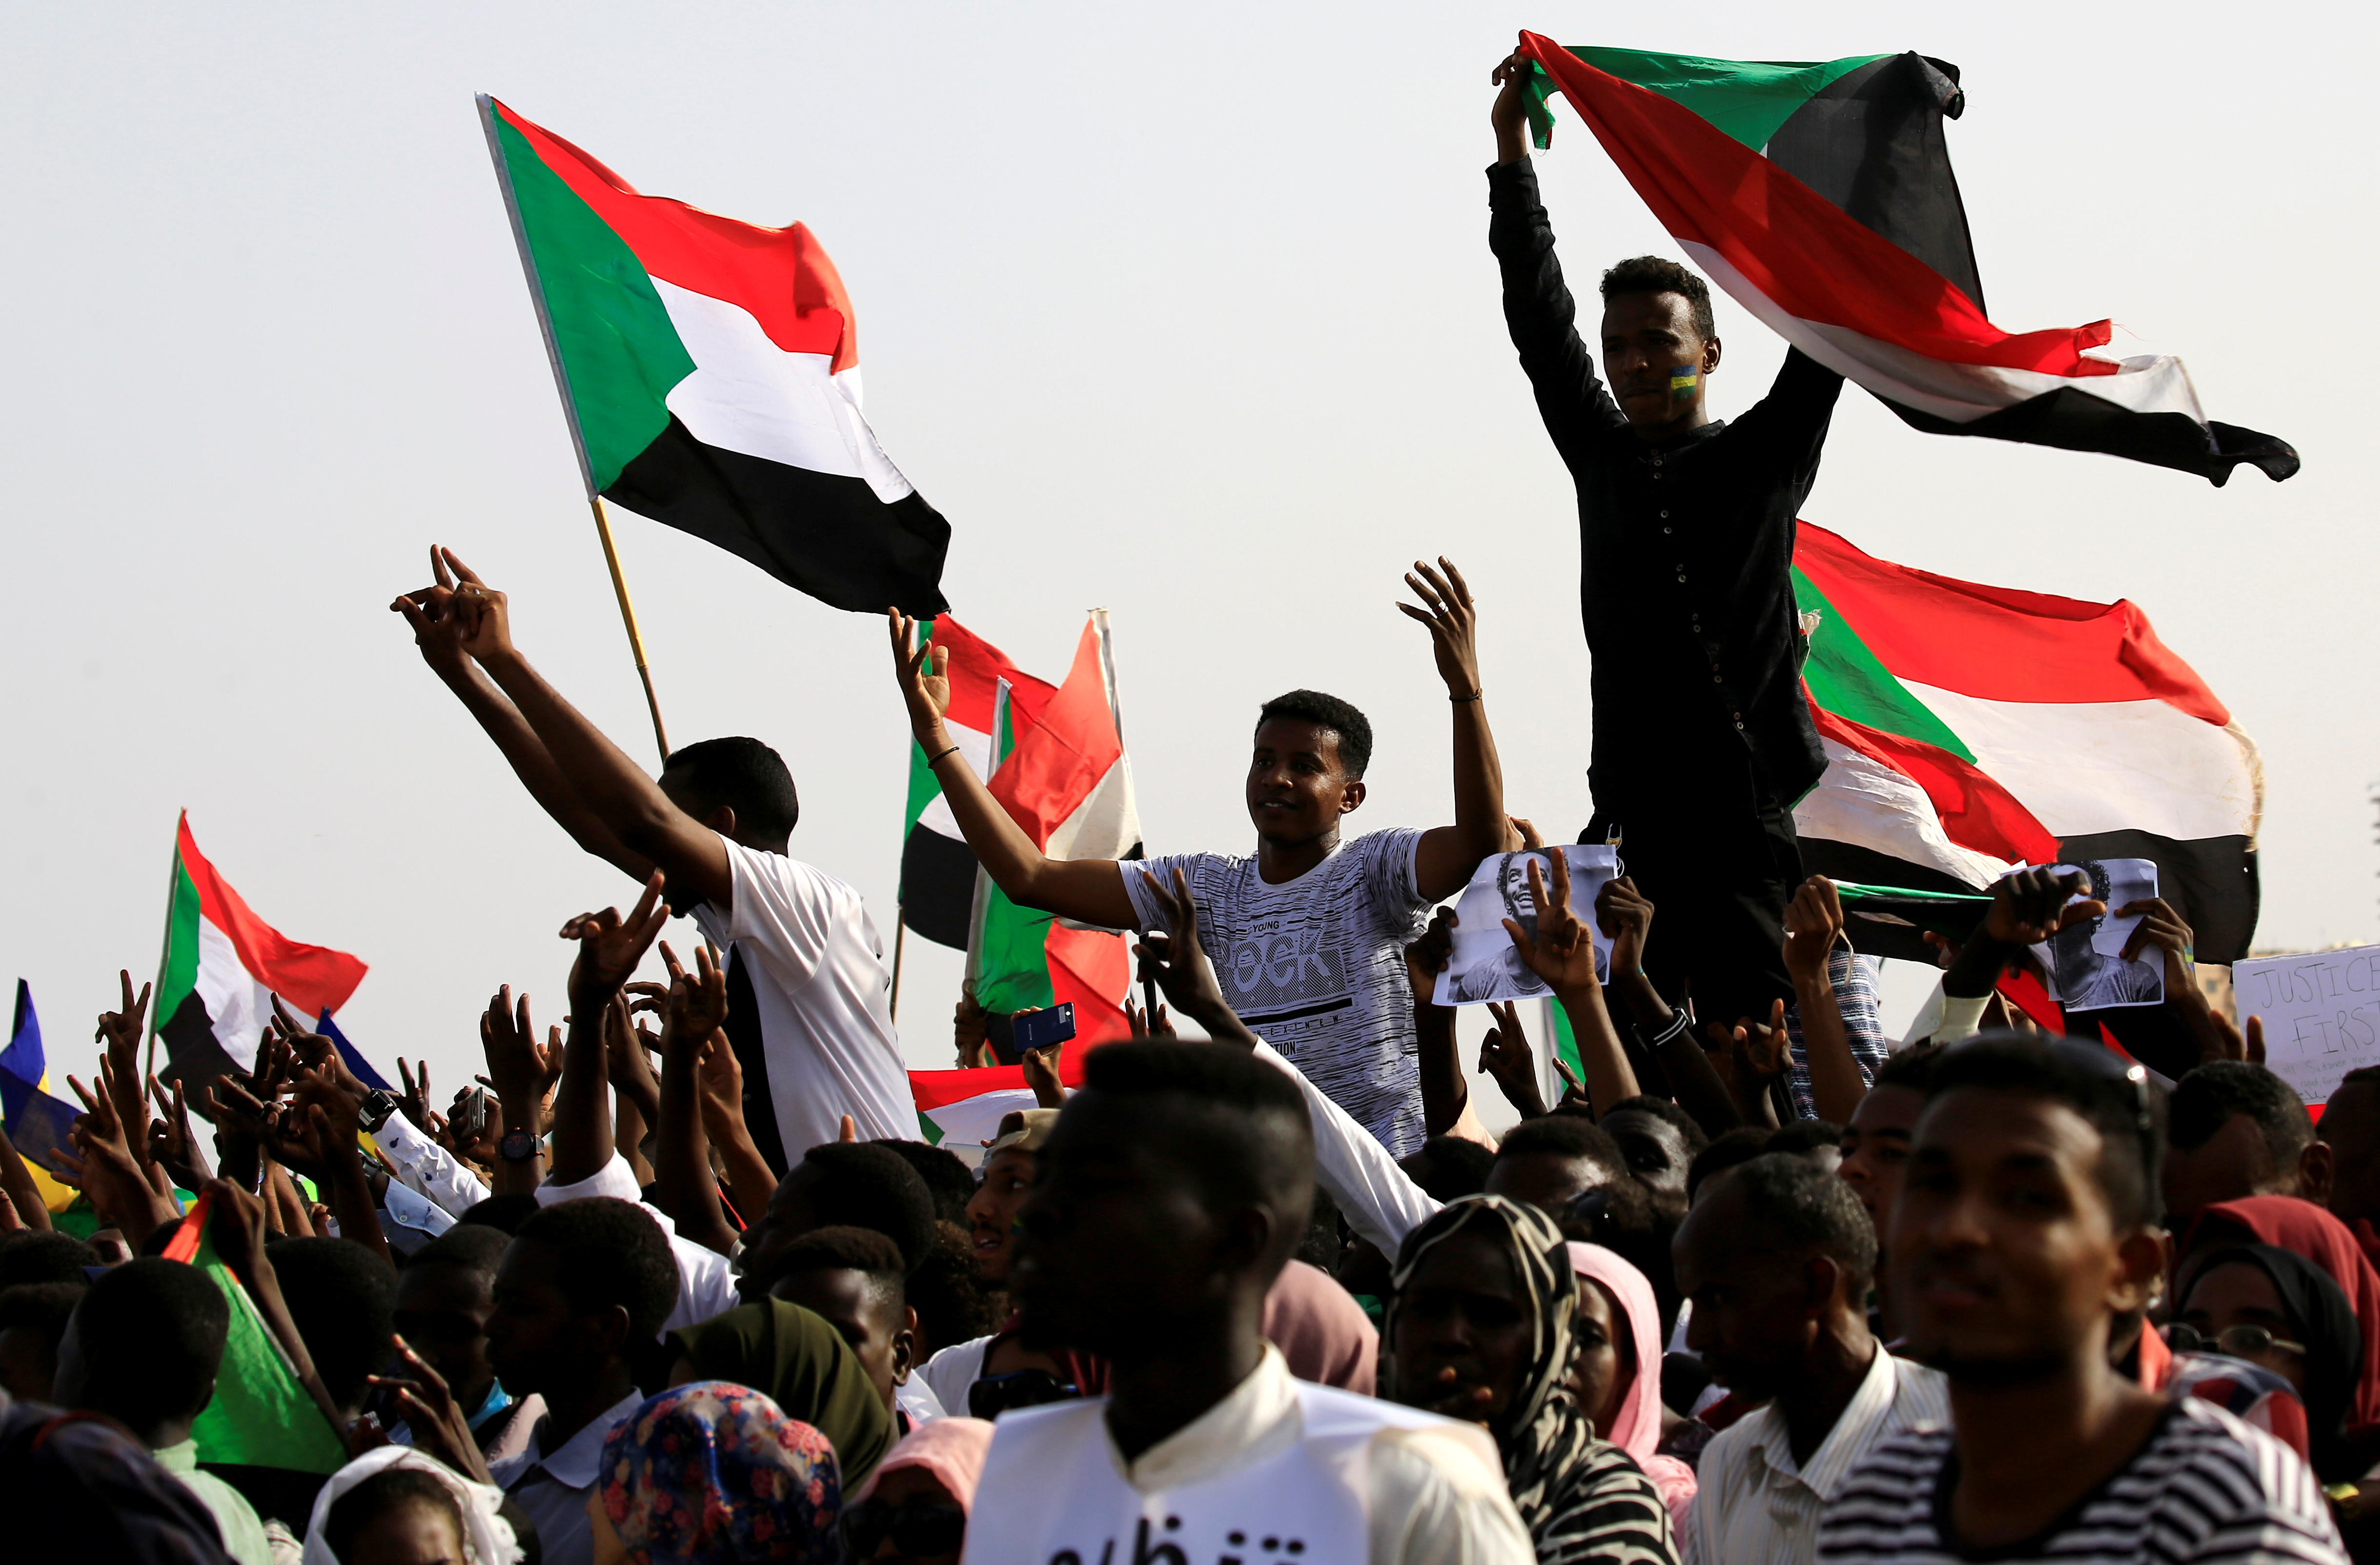 Sudanese bishop says country is fragile and future unclear following protests